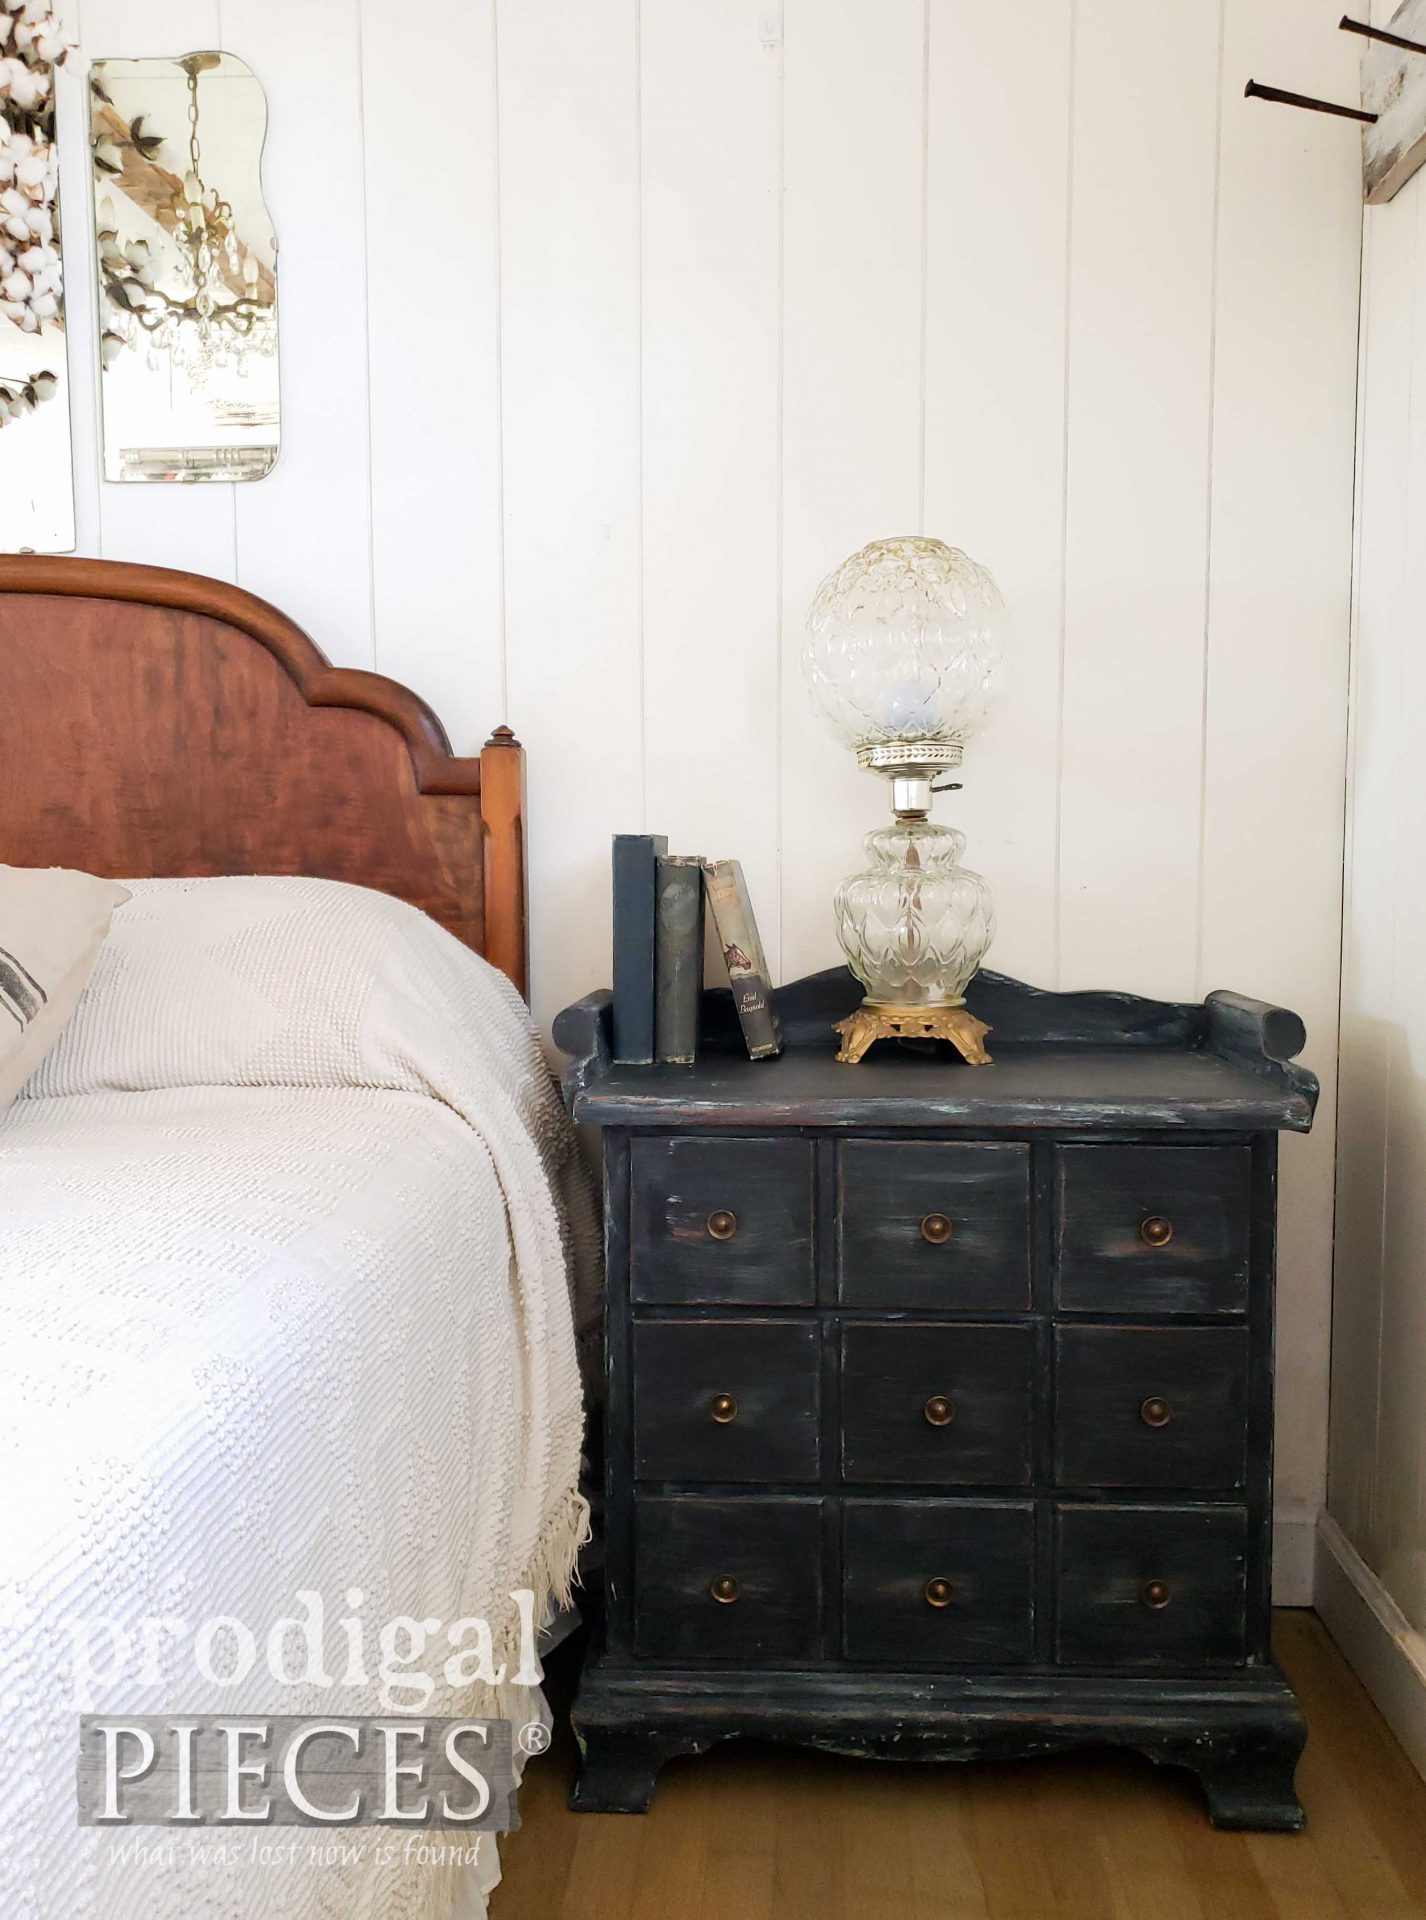 Vintage Farmhouse Chest Nightstand in Navy Milk Paint by Larissa of Prodigal Pieces | prodigalpieces.com #prodigalpieces #farmhouse #diy #home #furniture #homedecor